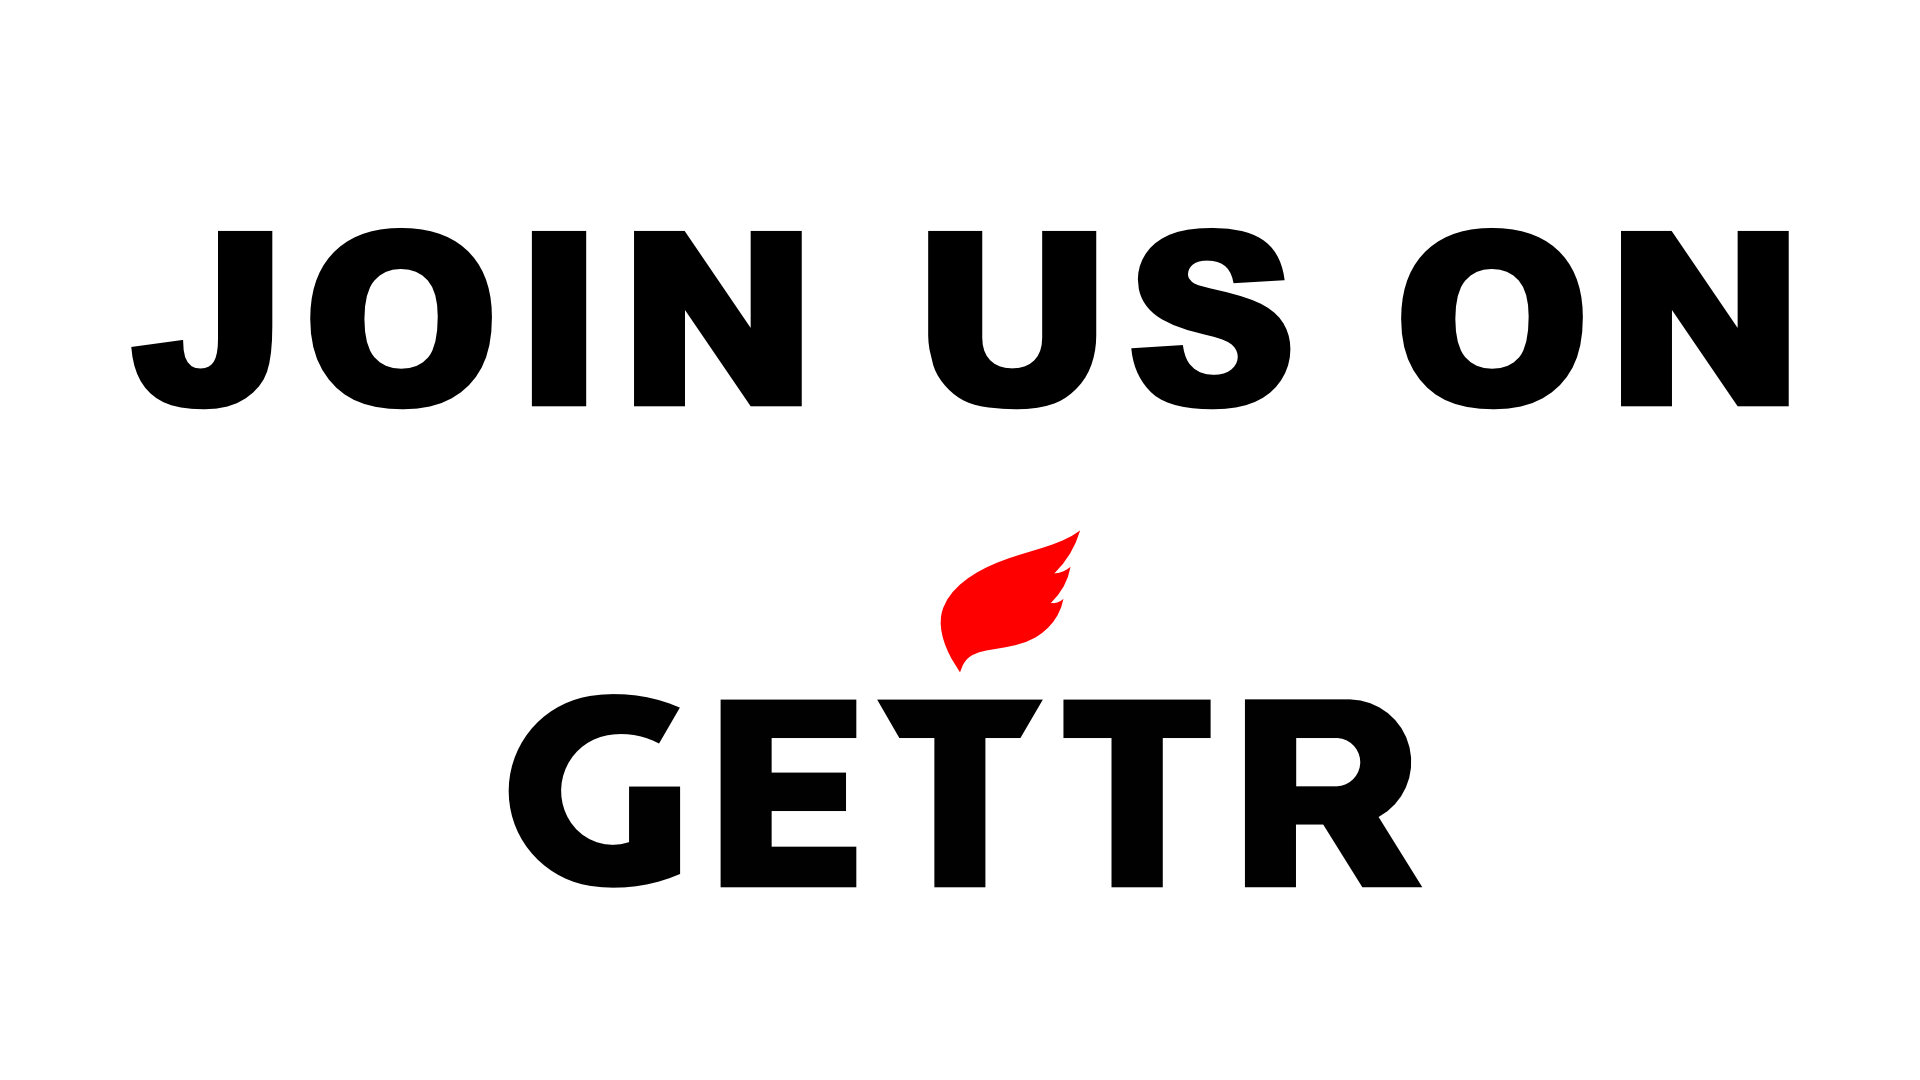 Join us on Gettr!